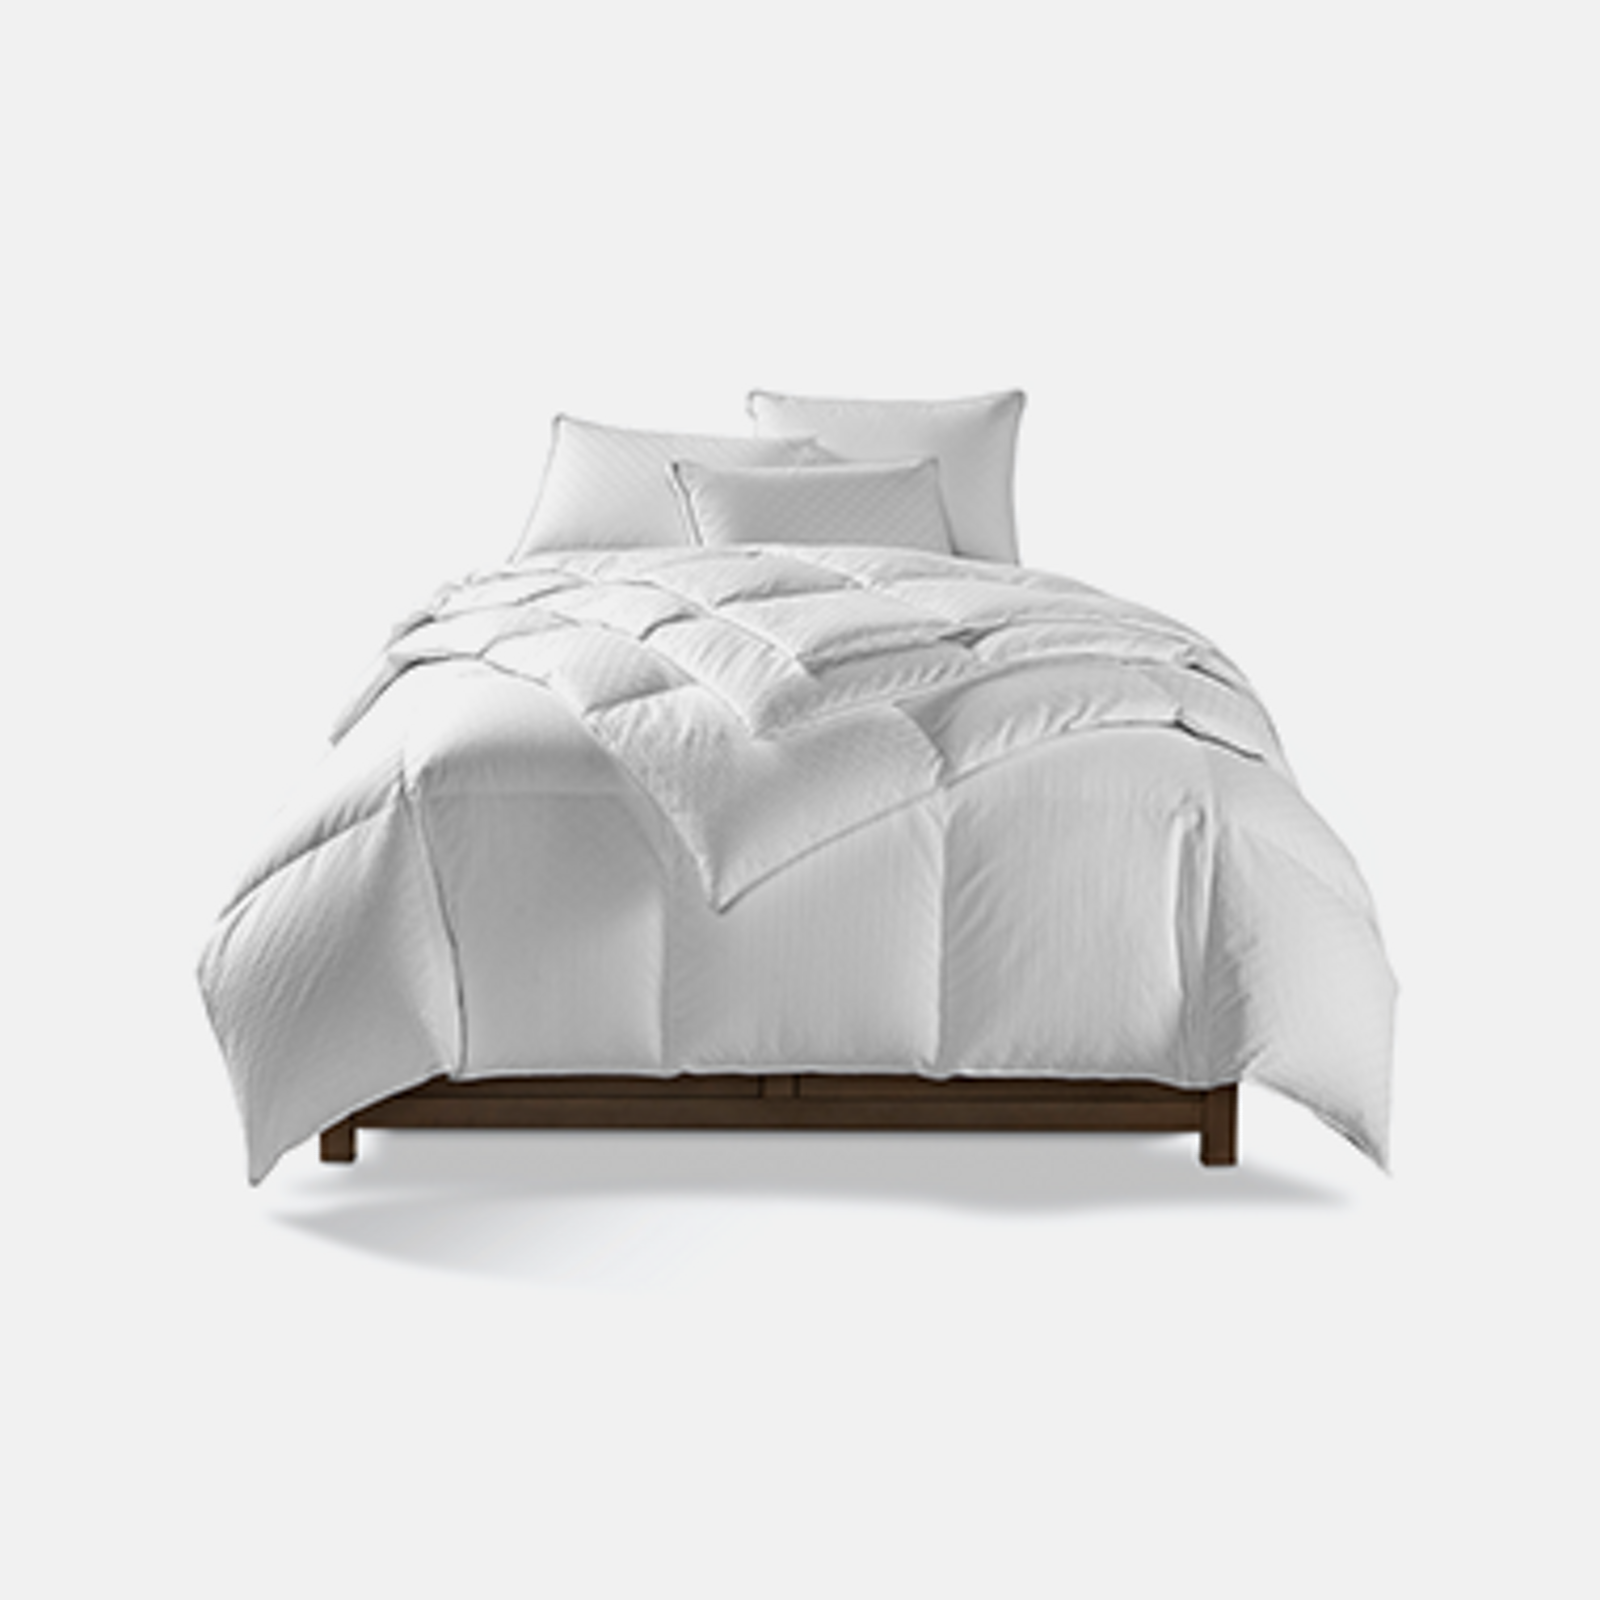 Plush Bed Blankets  Shop Vellux at WestPoint Home